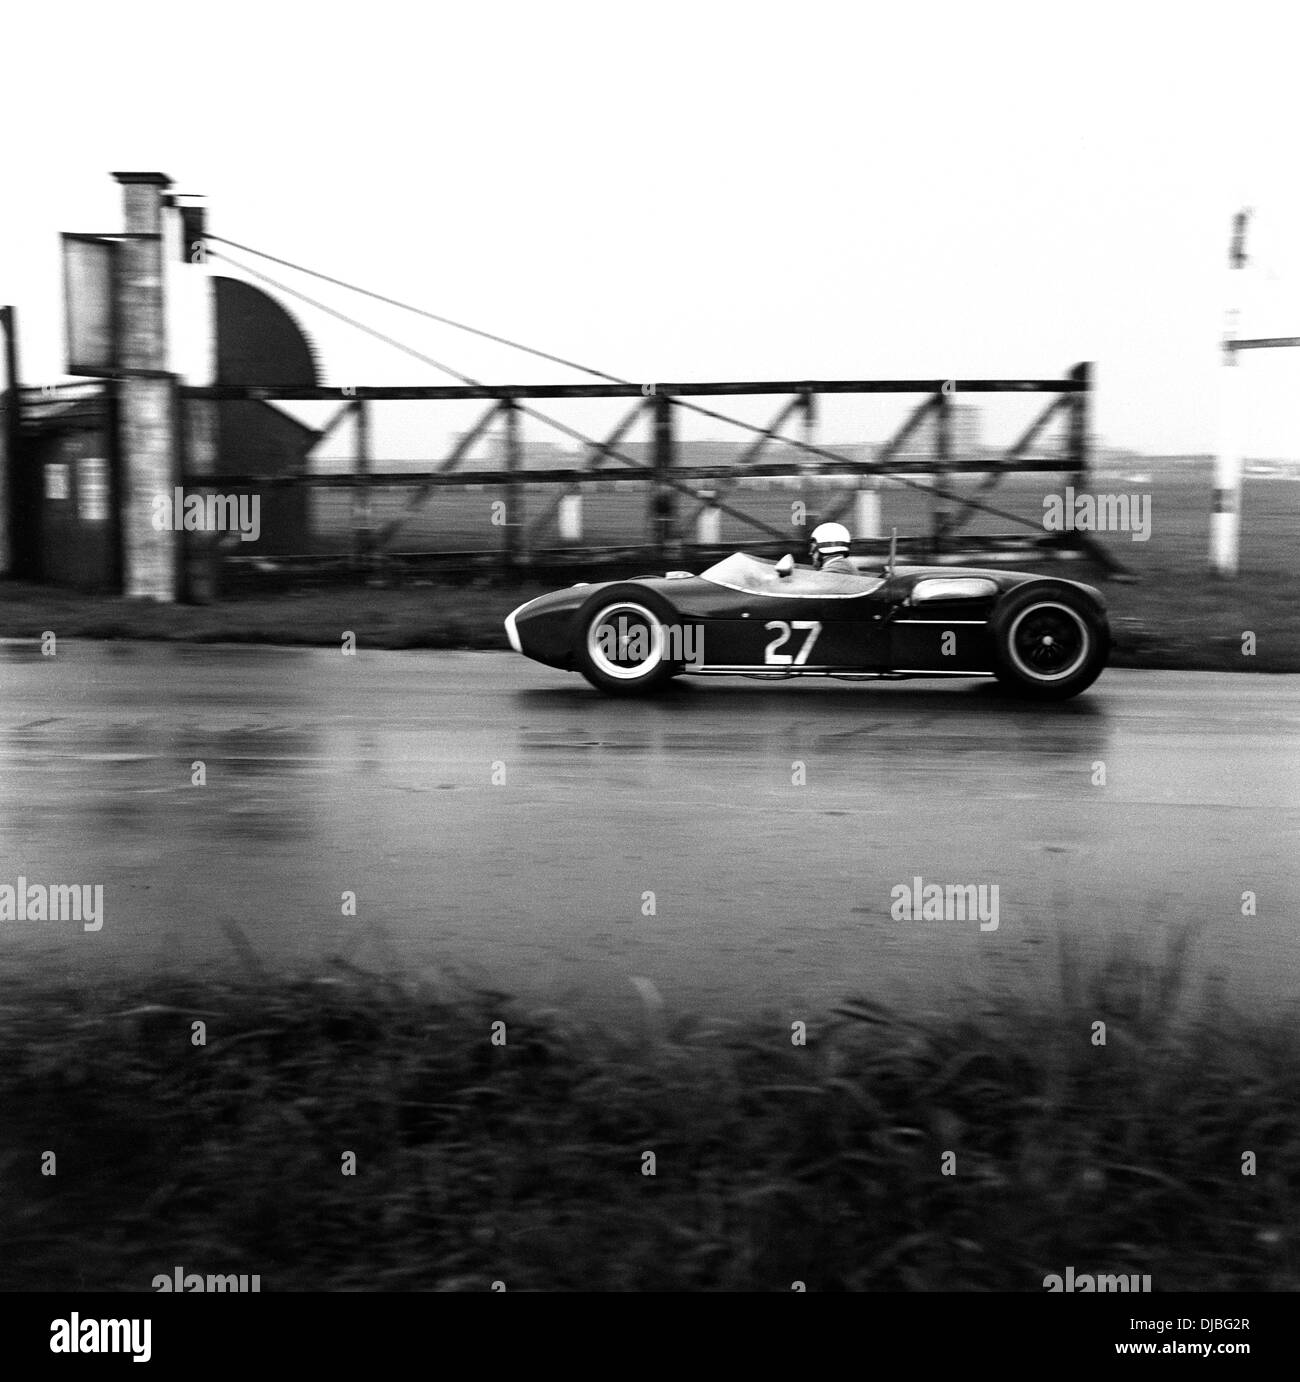 Tony Marsh in the Lotus-Climax at Anchor Crossing Corner in the VI Aintree 200, England 22 April 1961. Stock Photo